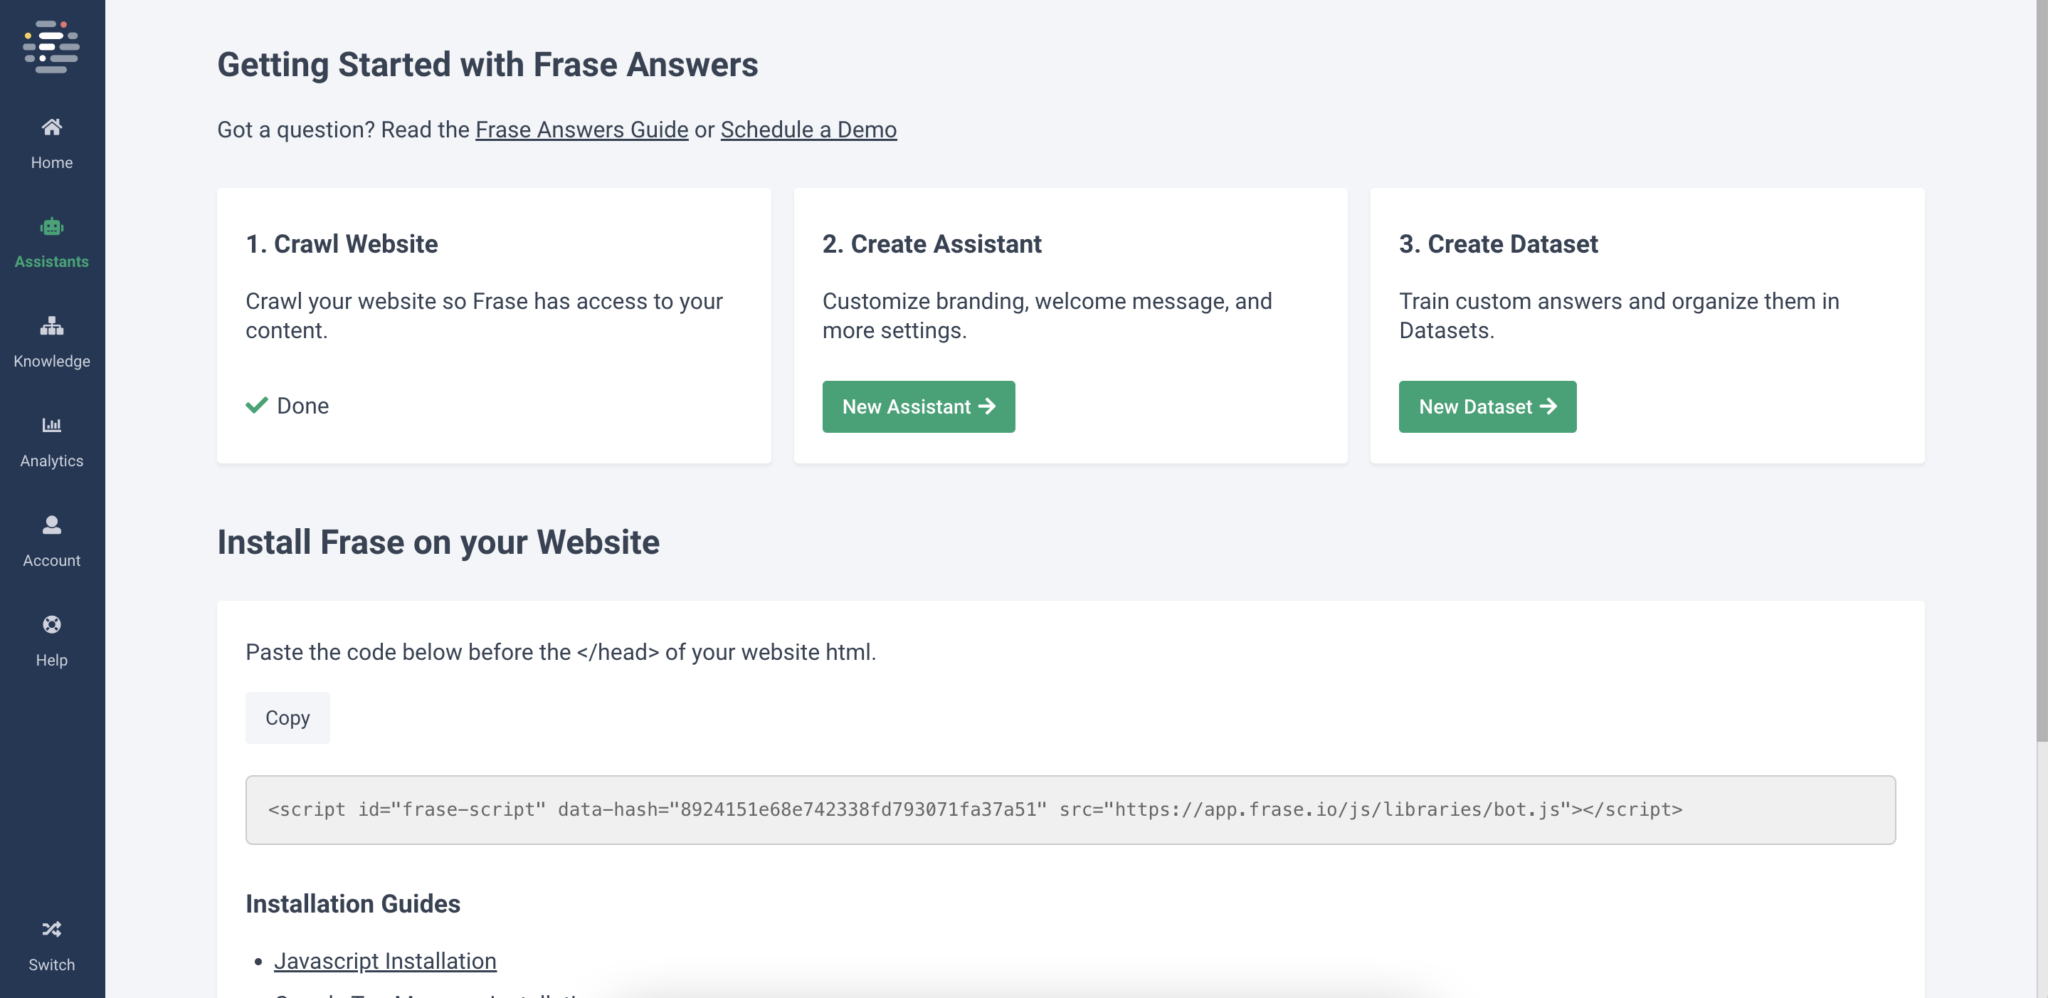 Screenshot of Frase answers chatbot tool.